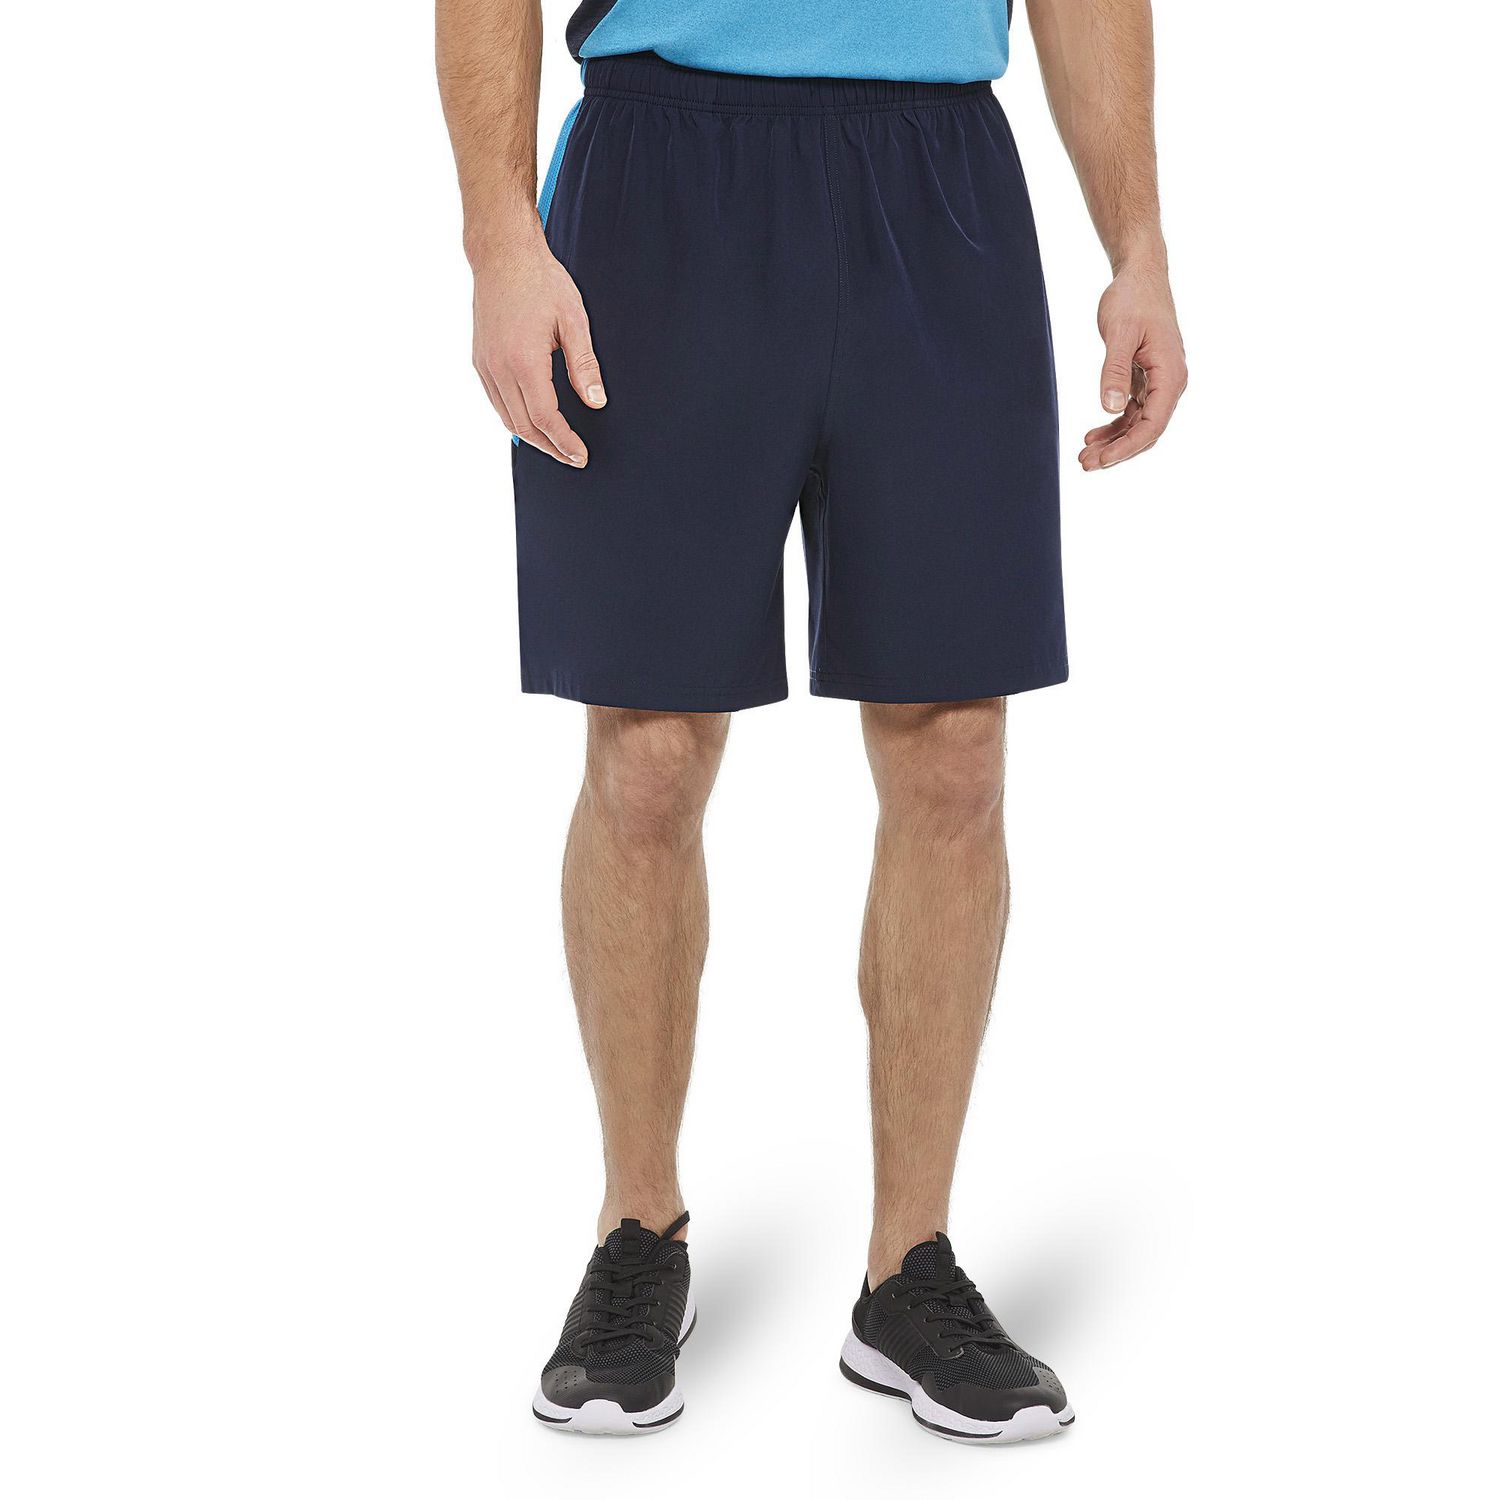 Athletic Works Men's Woven Shorts with Mesh | Walmart Canada